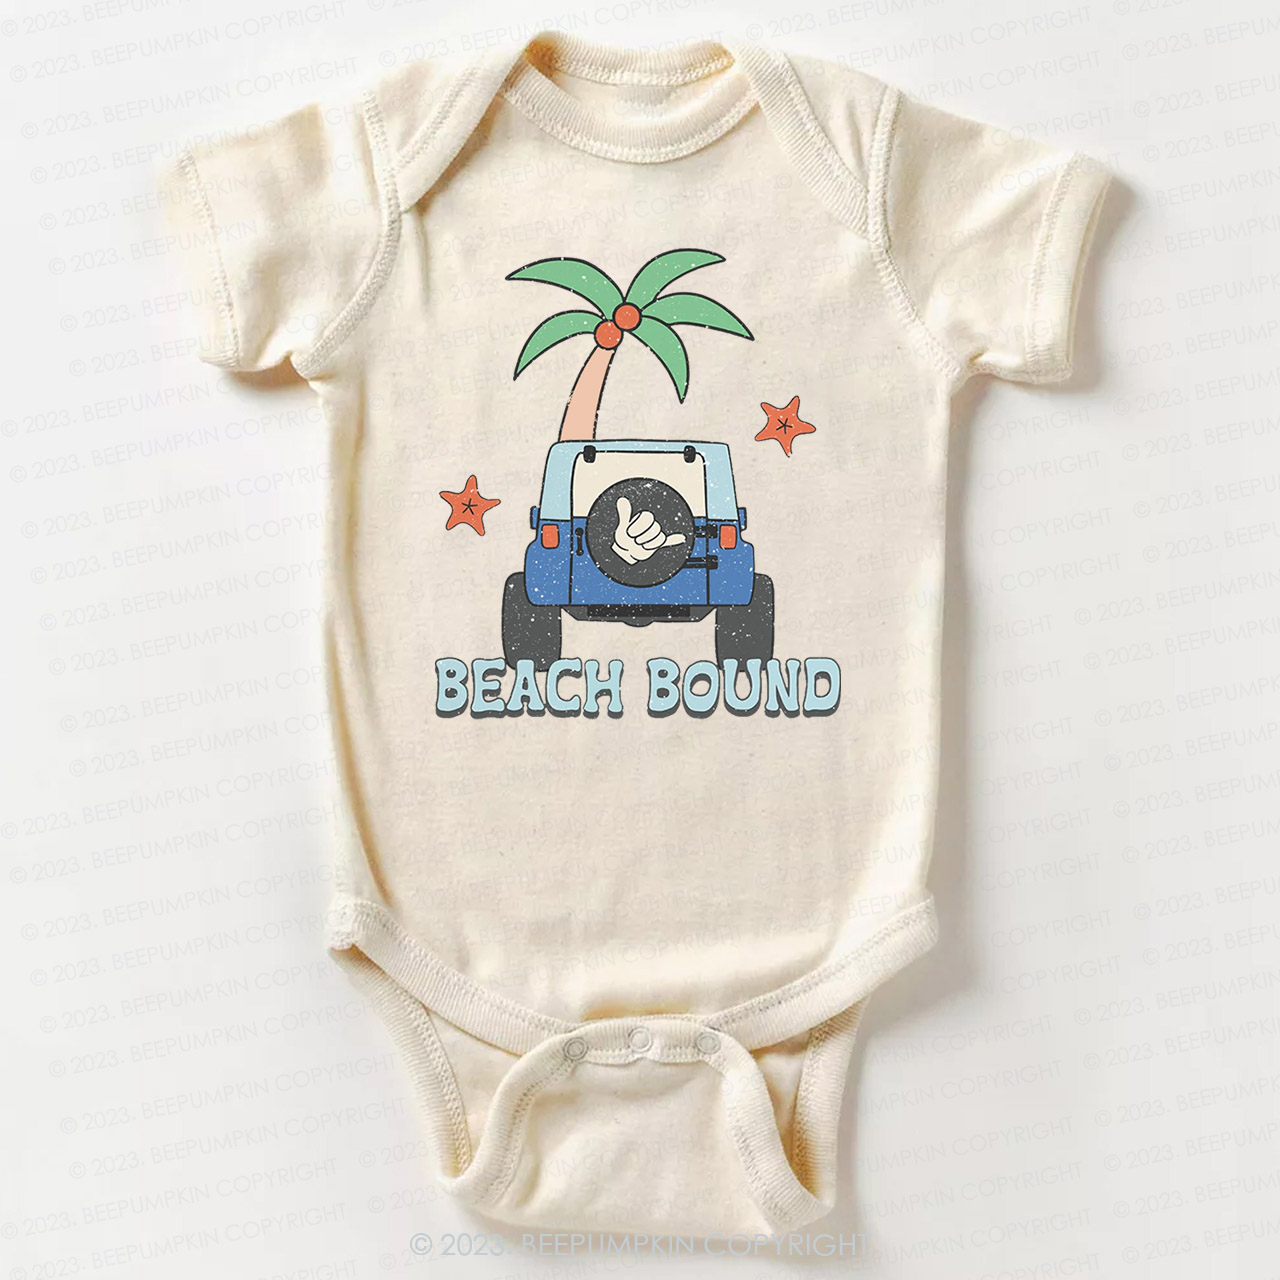 Beach Bound Car And Tree Bodysuit For Baby